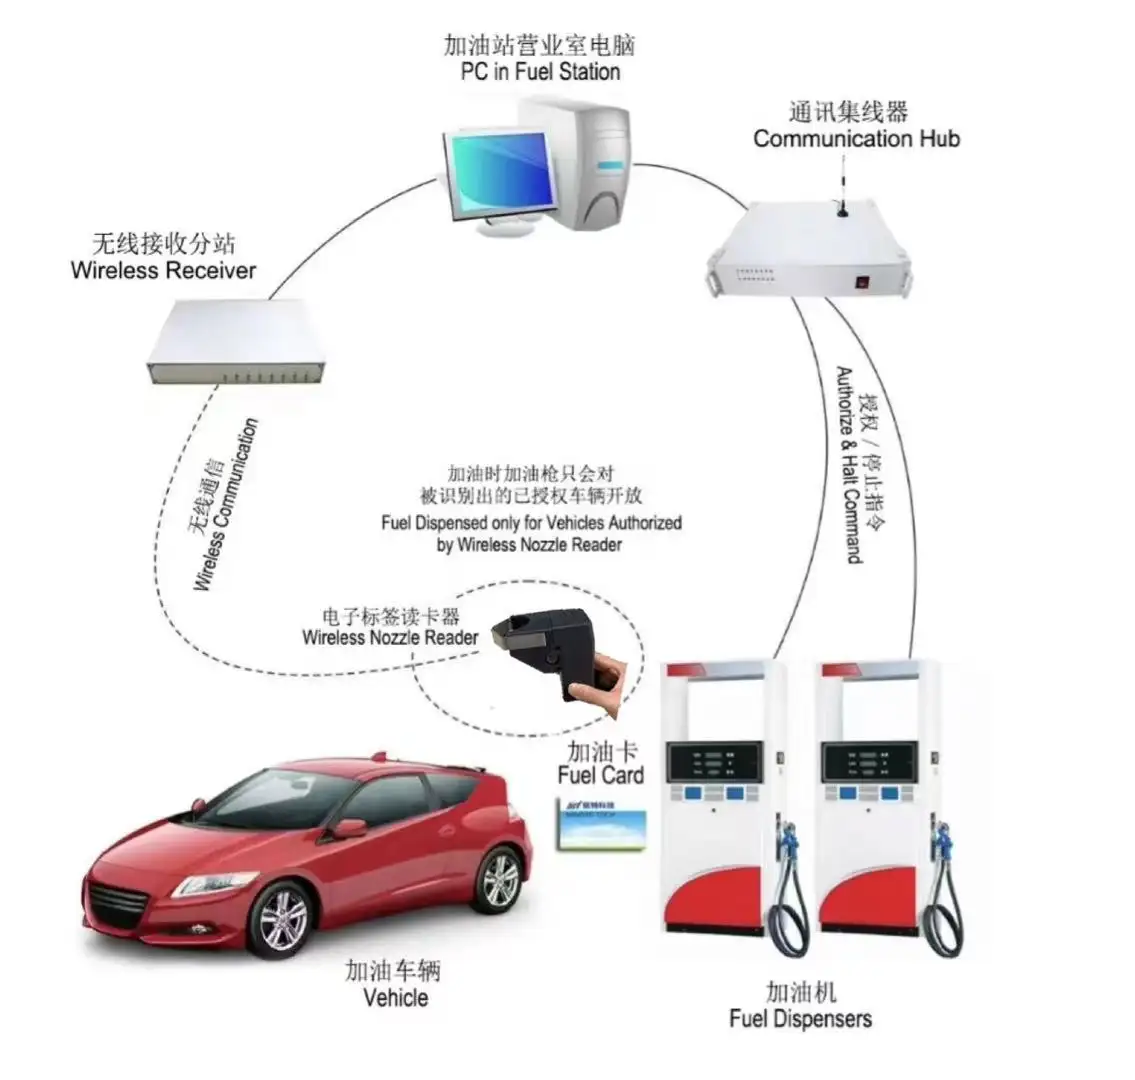 Smart Wireless Nozzle reader for Automatic Vehicle Identification System used for Fueling   CNG stations